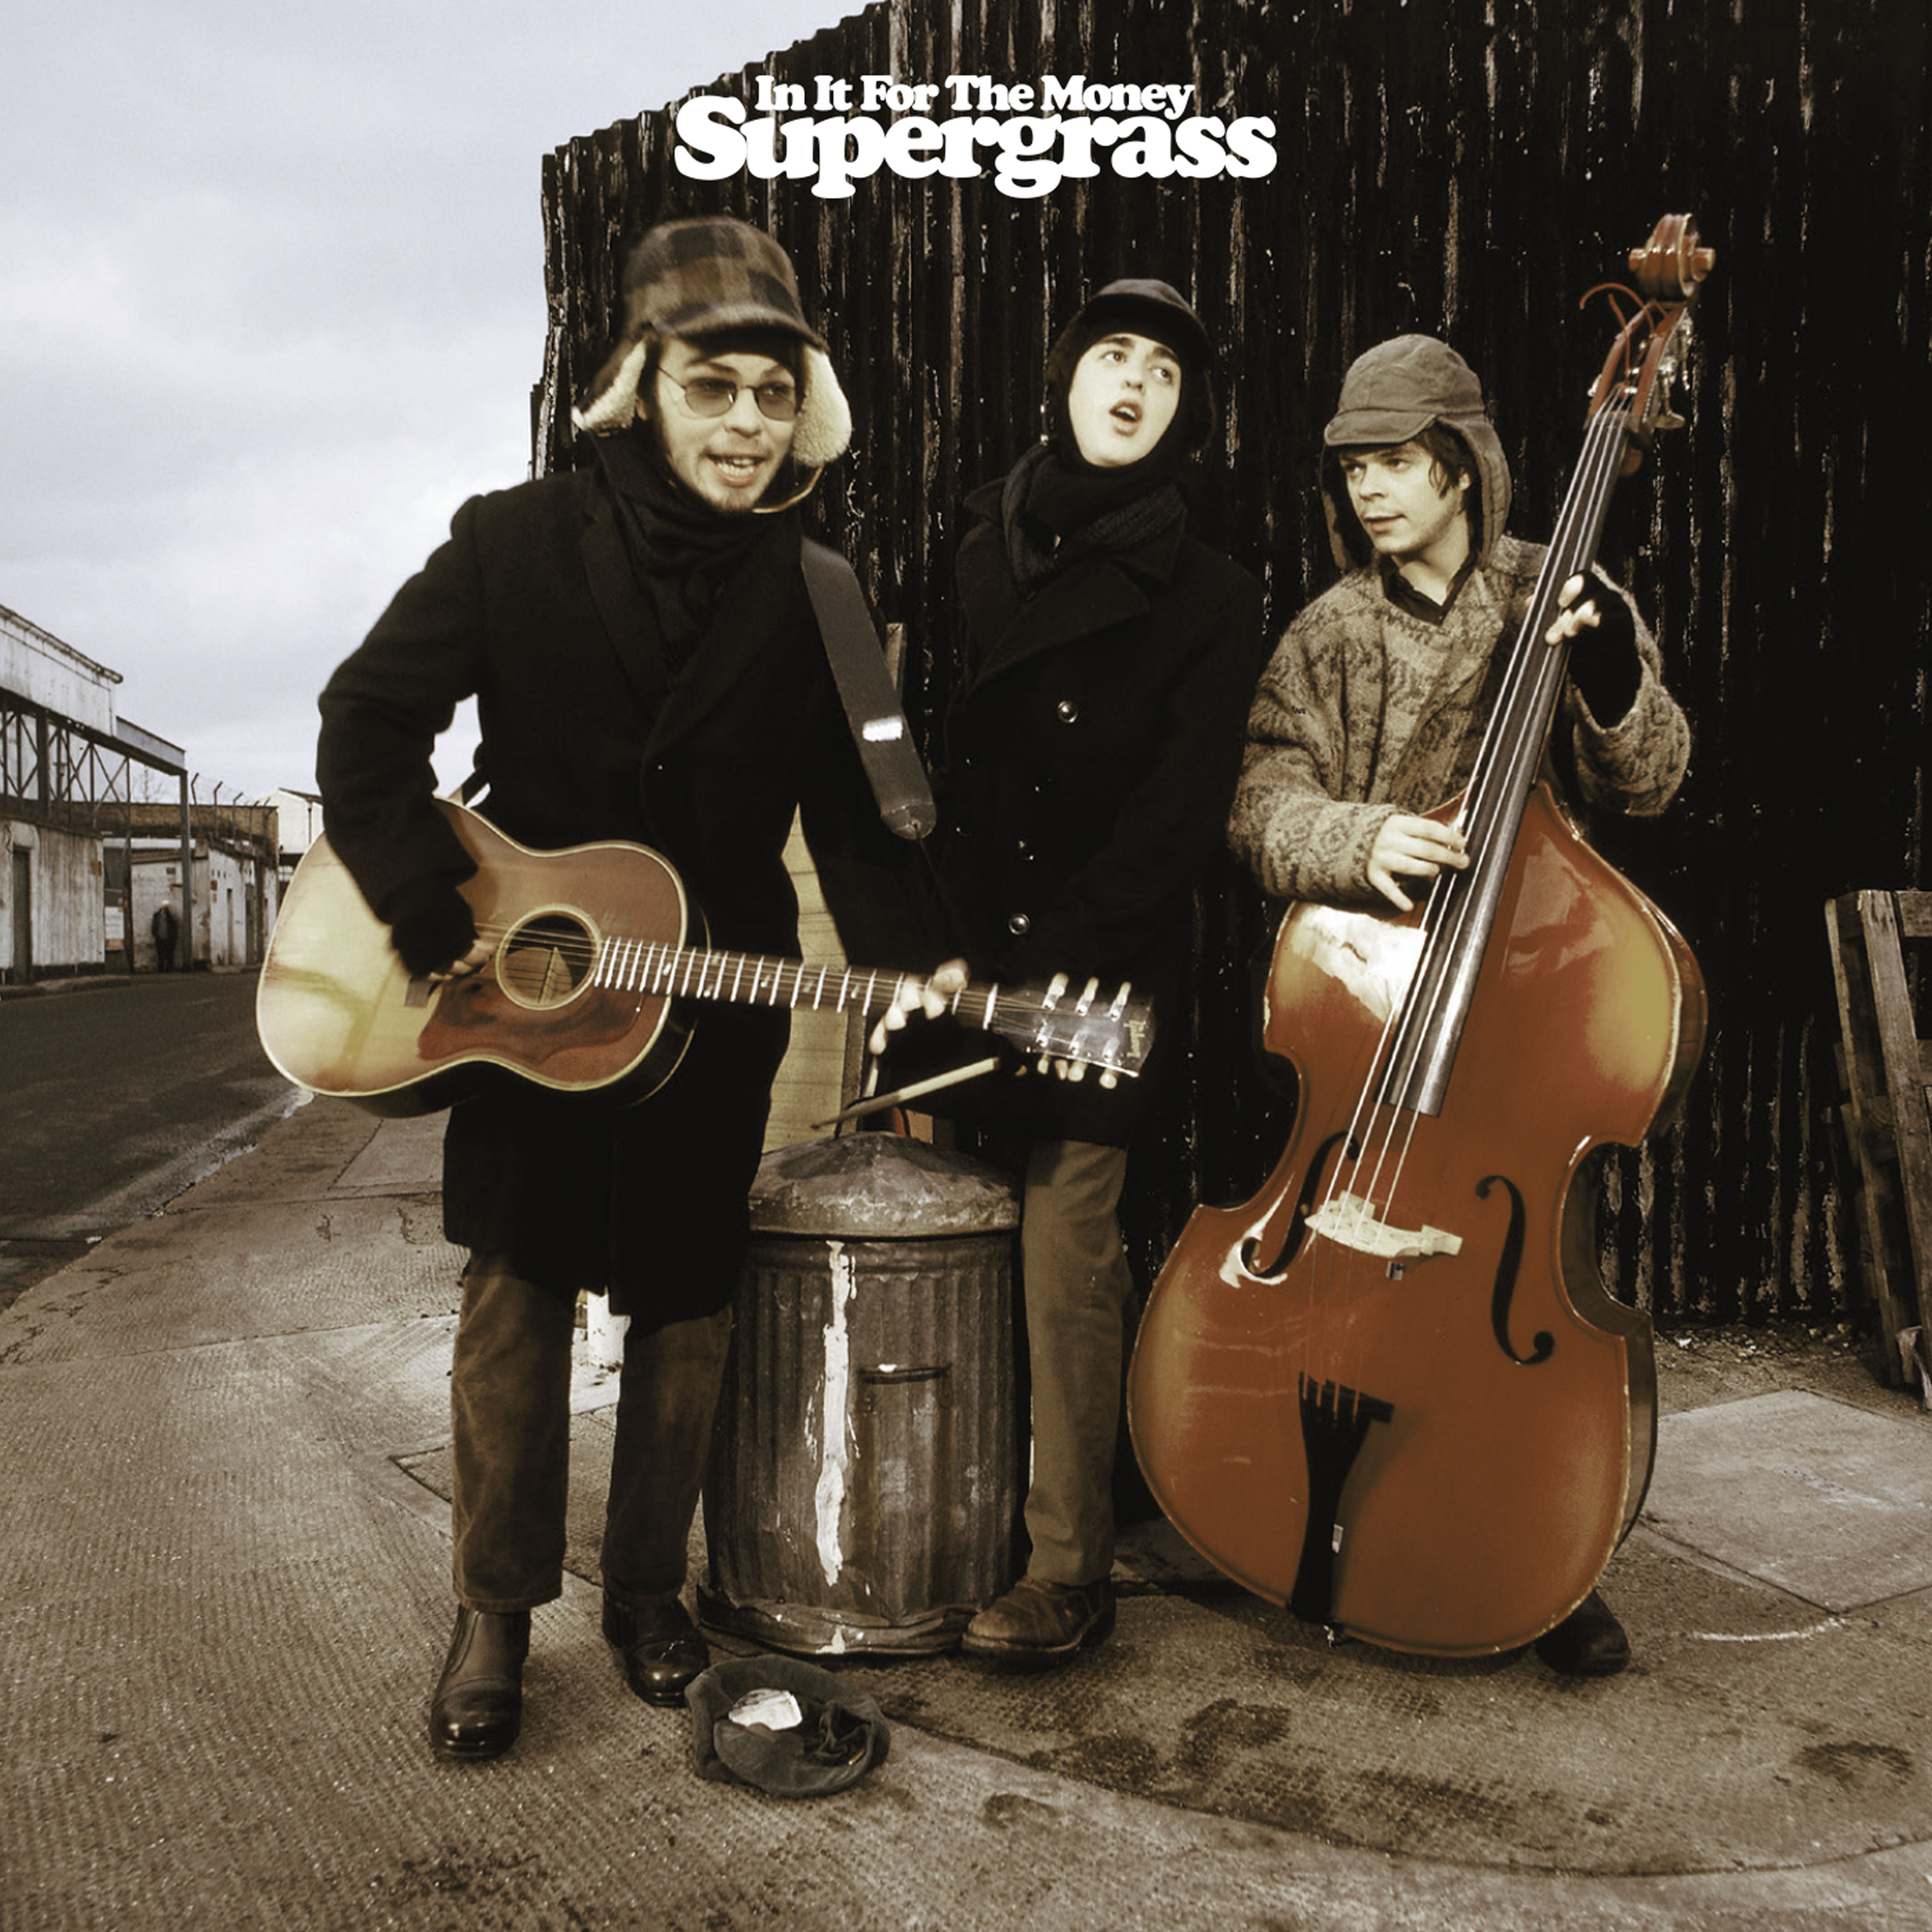 Supergrass – In It for the Money (2021 Remaster) (1997/2021) [FLAC 24bit/96kHz]